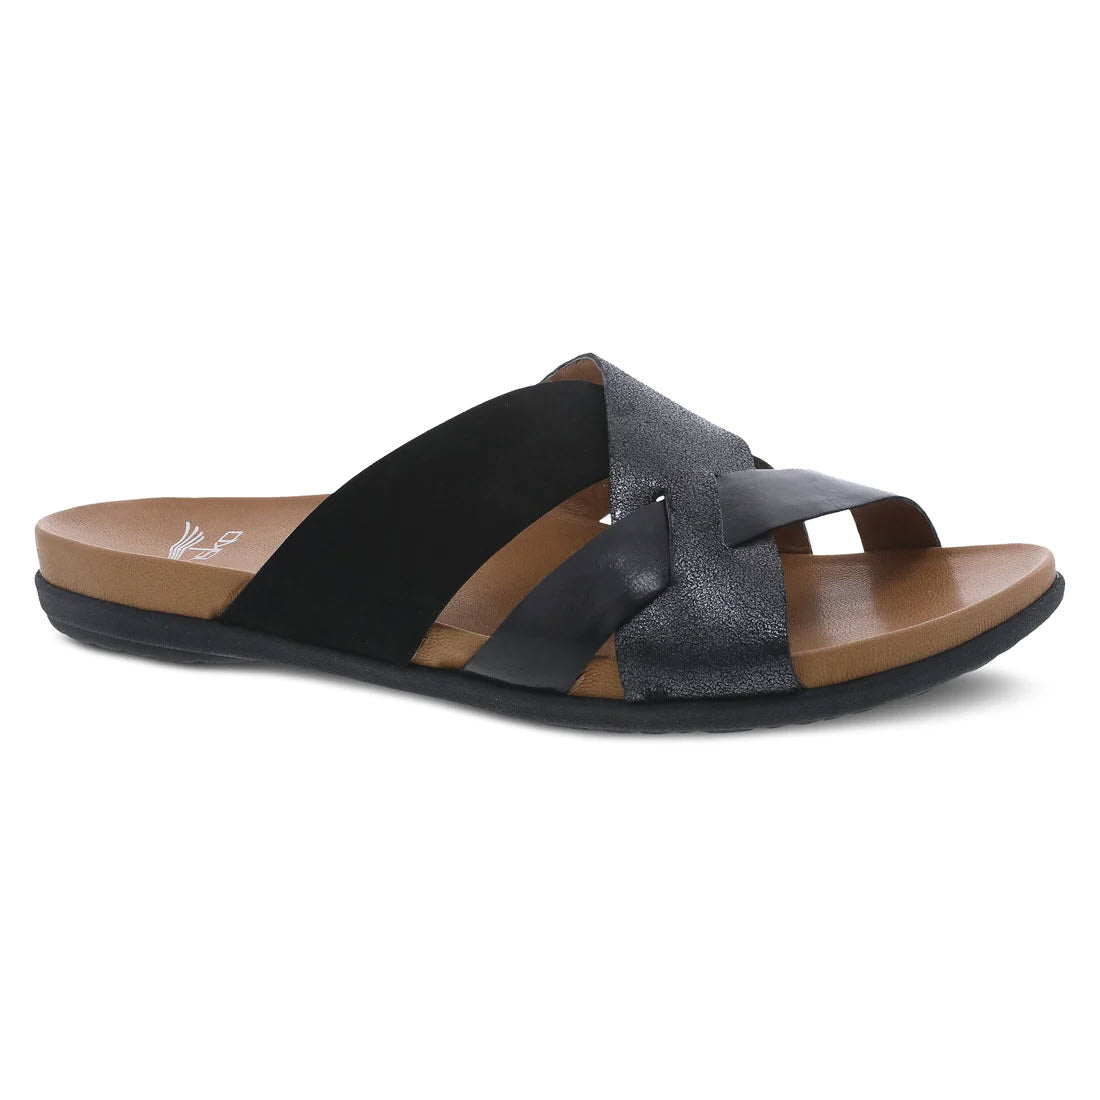 A single Dansko Joanna Black Multi women's sandal with a flat, lightweight rubber outsole, displayed against a white background.